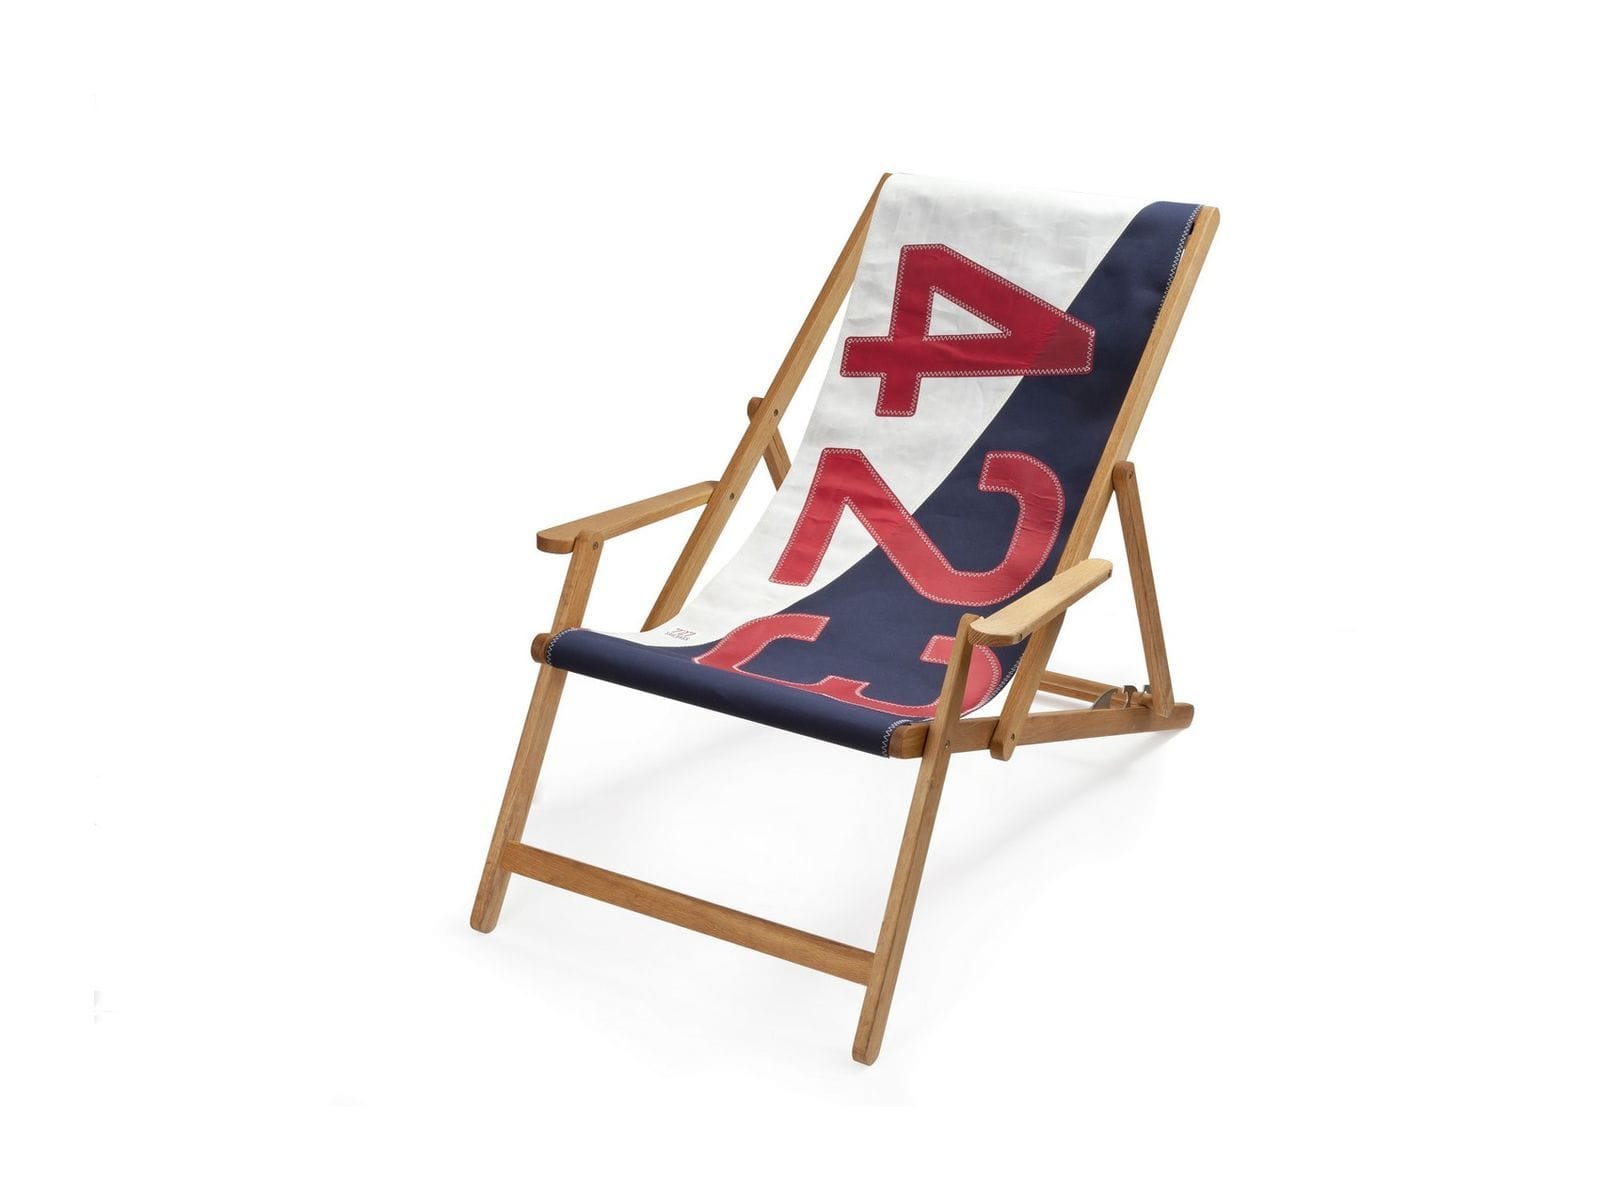 HomeRoots Outdoors Beach Chairs White, Navy Blue, and Red / Recycled Sailcloth 28.35" X 61.02" X 3.15" White Navy Blue Recycled Sailcloth Deck Chair Dacron Red 423